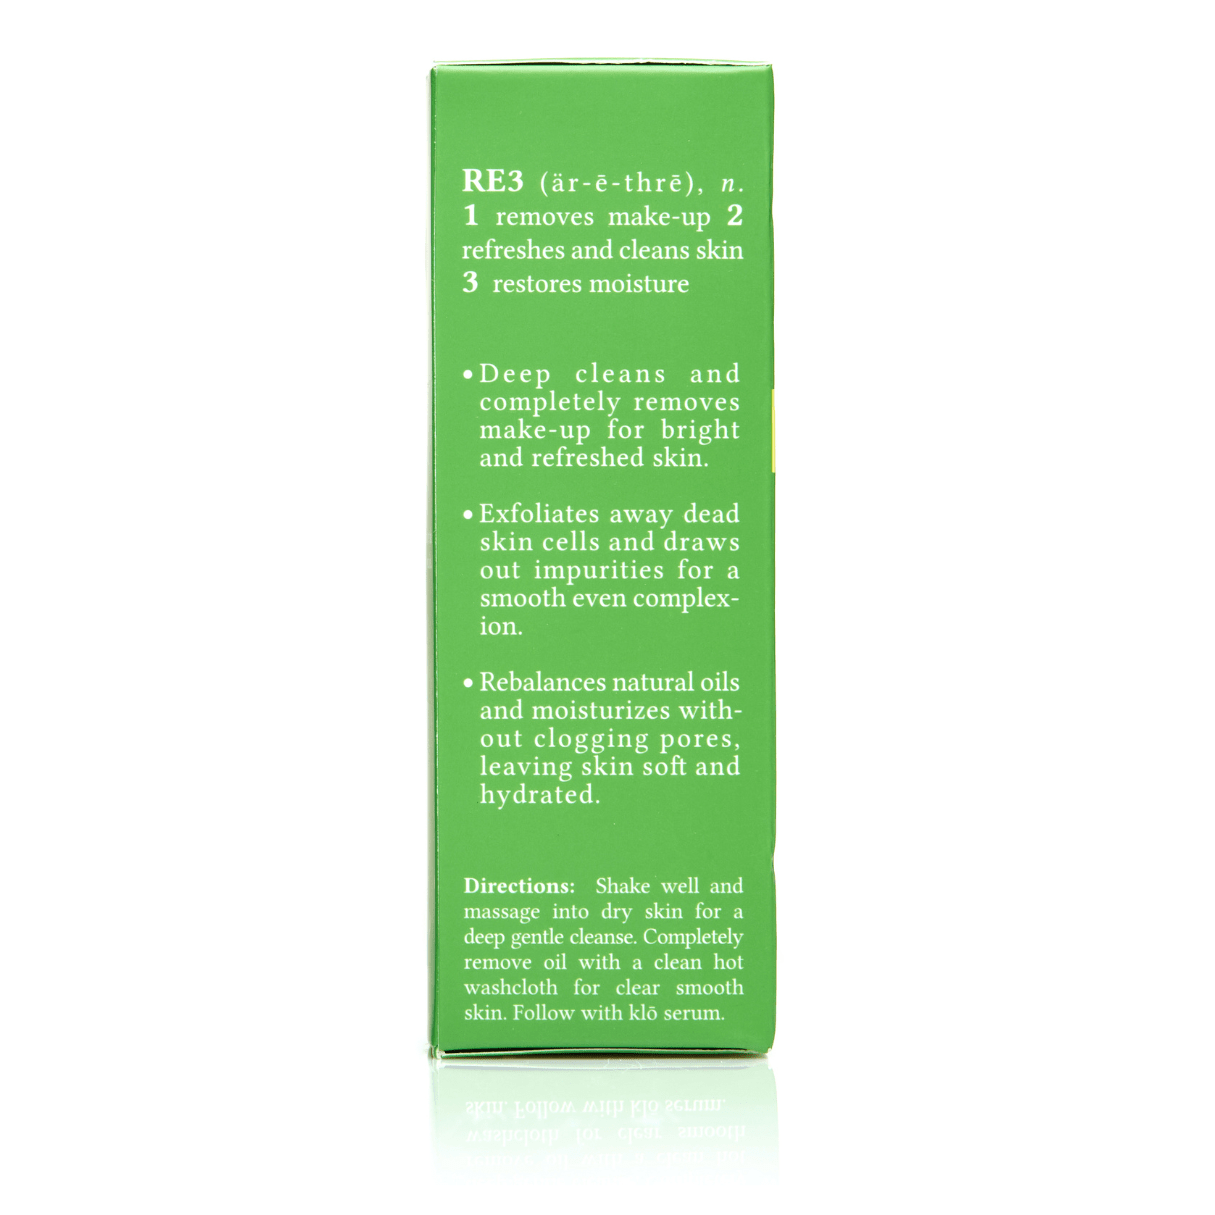 Klo Organic Beauty RE3 oil cleanser definition and directions on box.